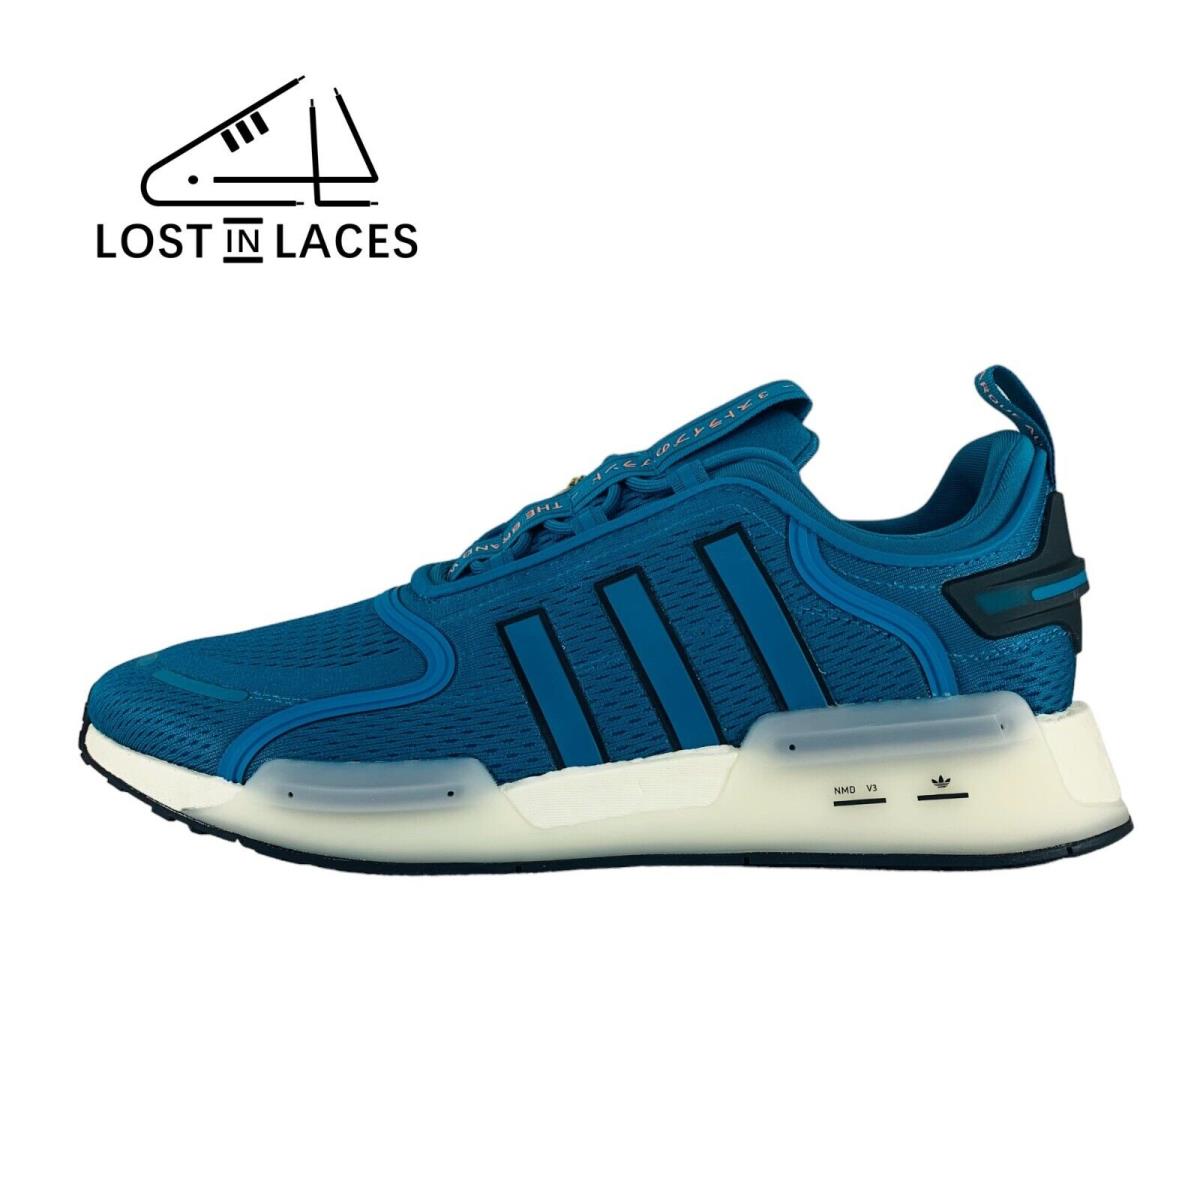 Adidas NMD_V3 Active Teal White Sneakers Lifestyle Shoes Men`s Sizes - Blue